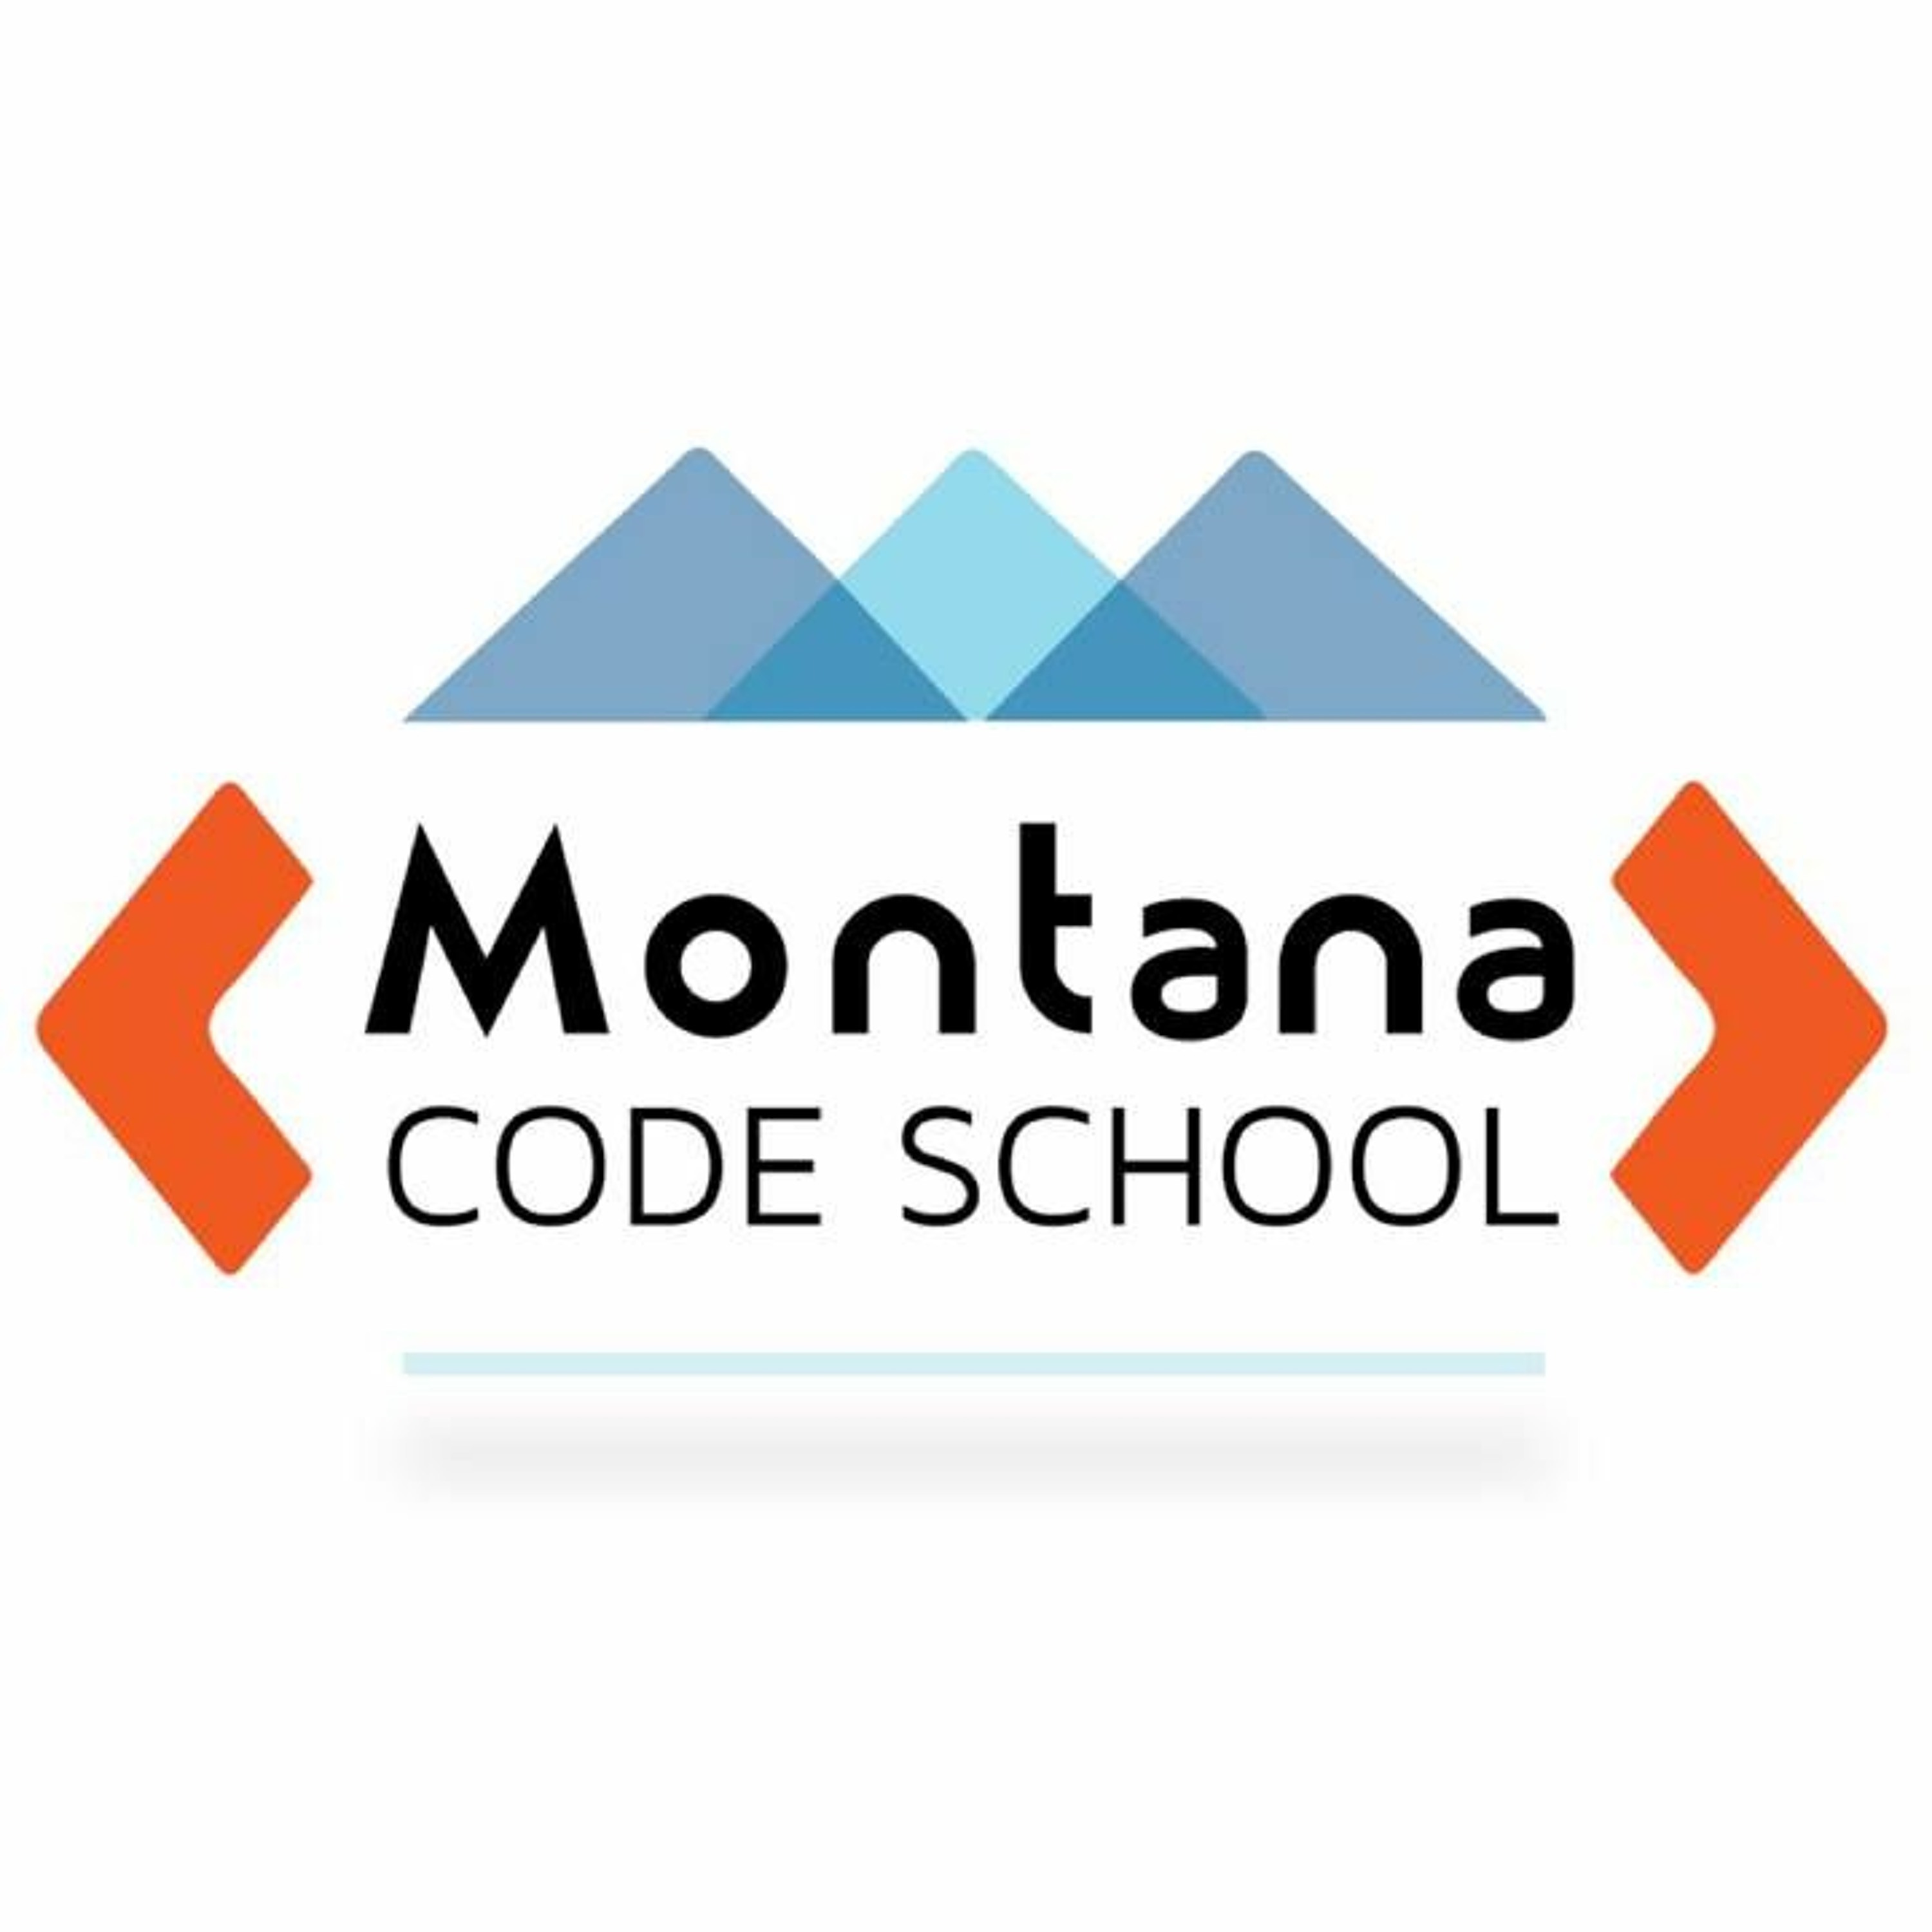 Montana Code School - a Case Study in Education Innovation